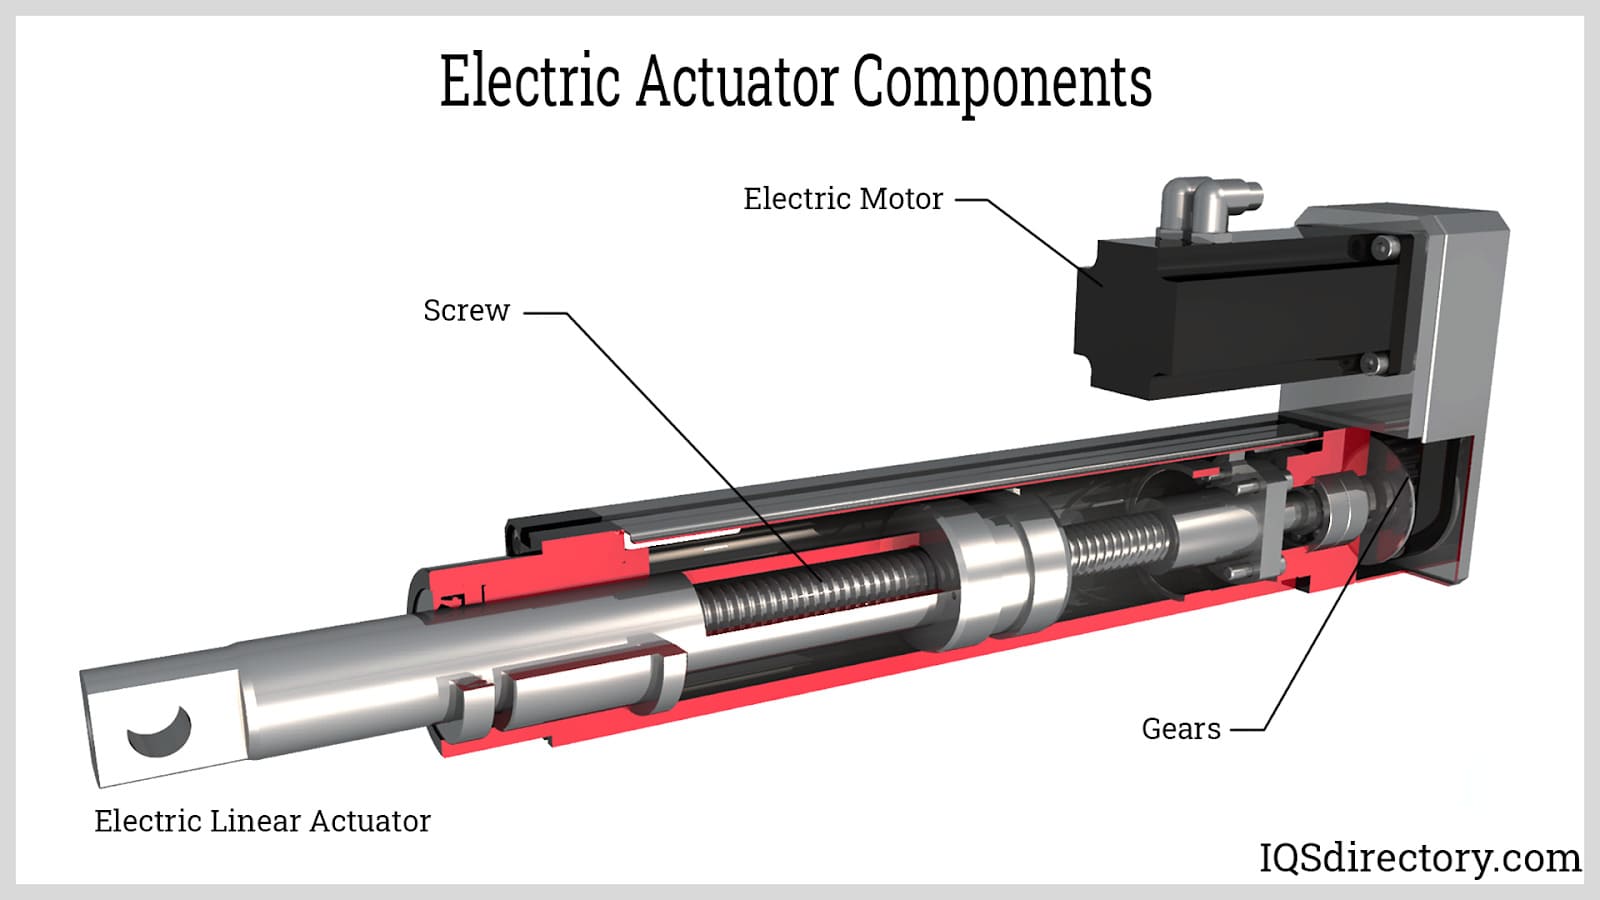 Electric Actuator Components